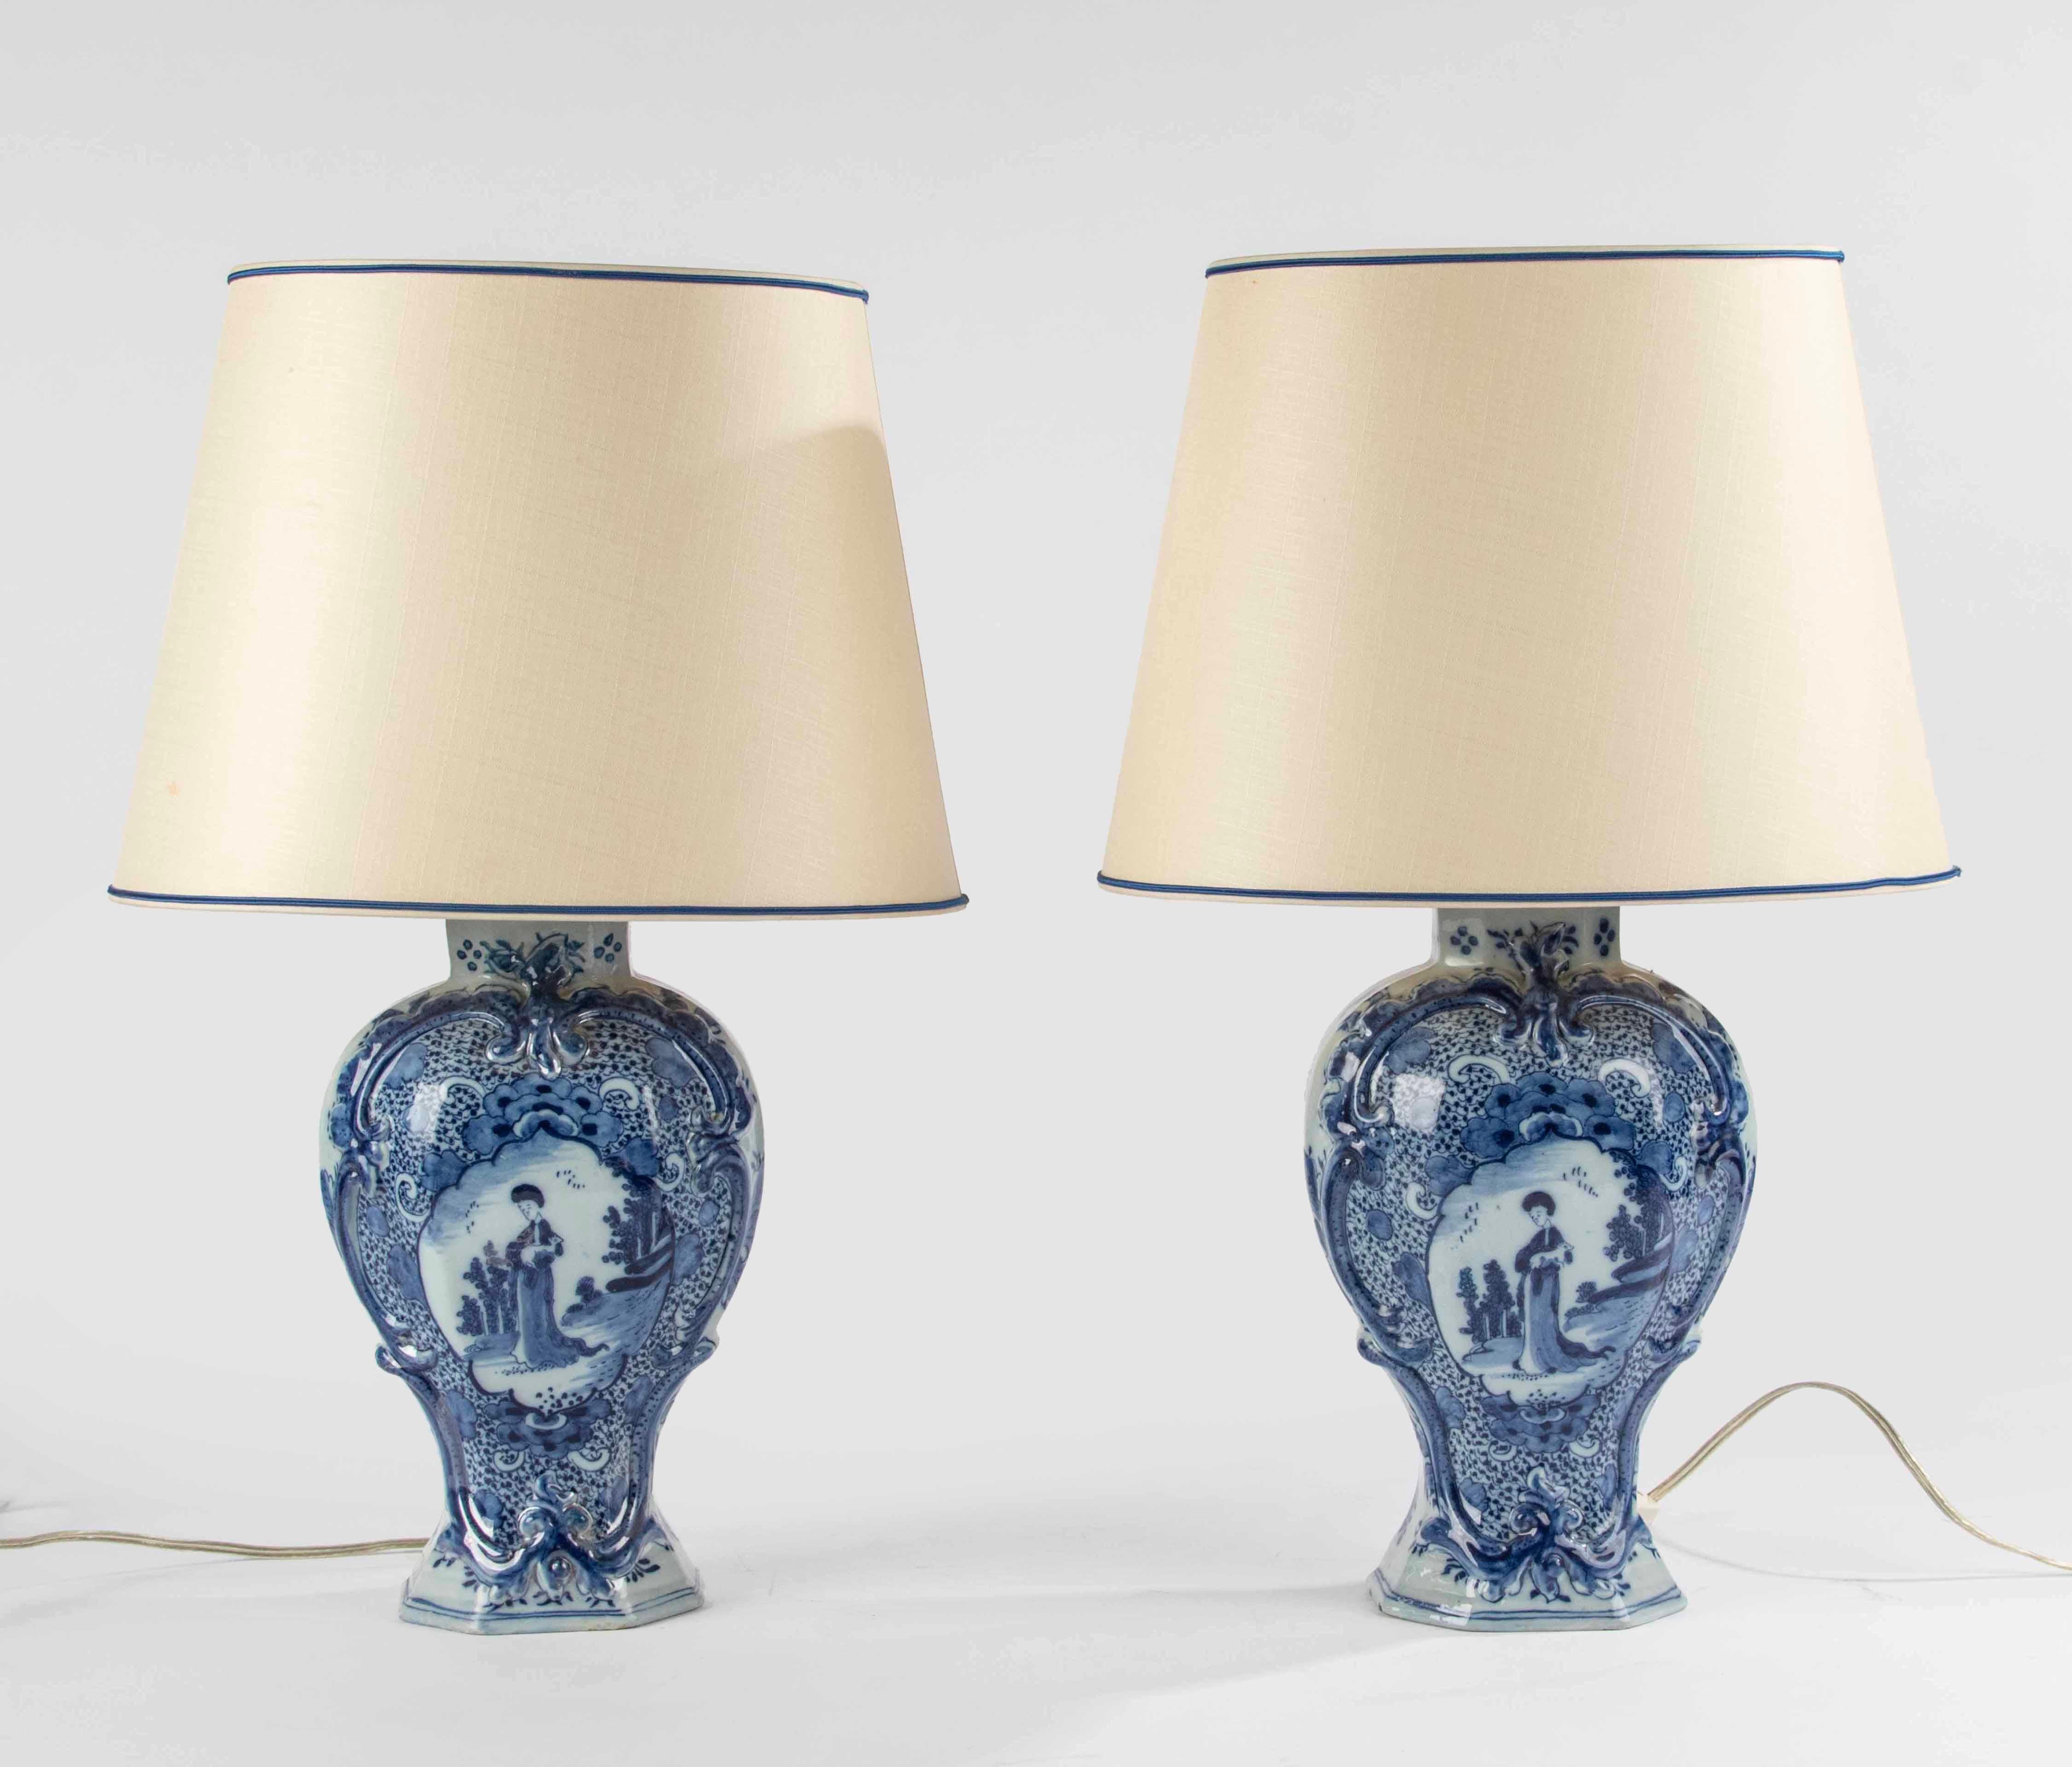 A charming pair of late 18th century blue and white ceramic Delft vases, recently mounted as lamps. 
The vases are beautifully decorated with floral ornaments in the typical Delft style and a scene with a woman with a deer in her arms. 
One of the